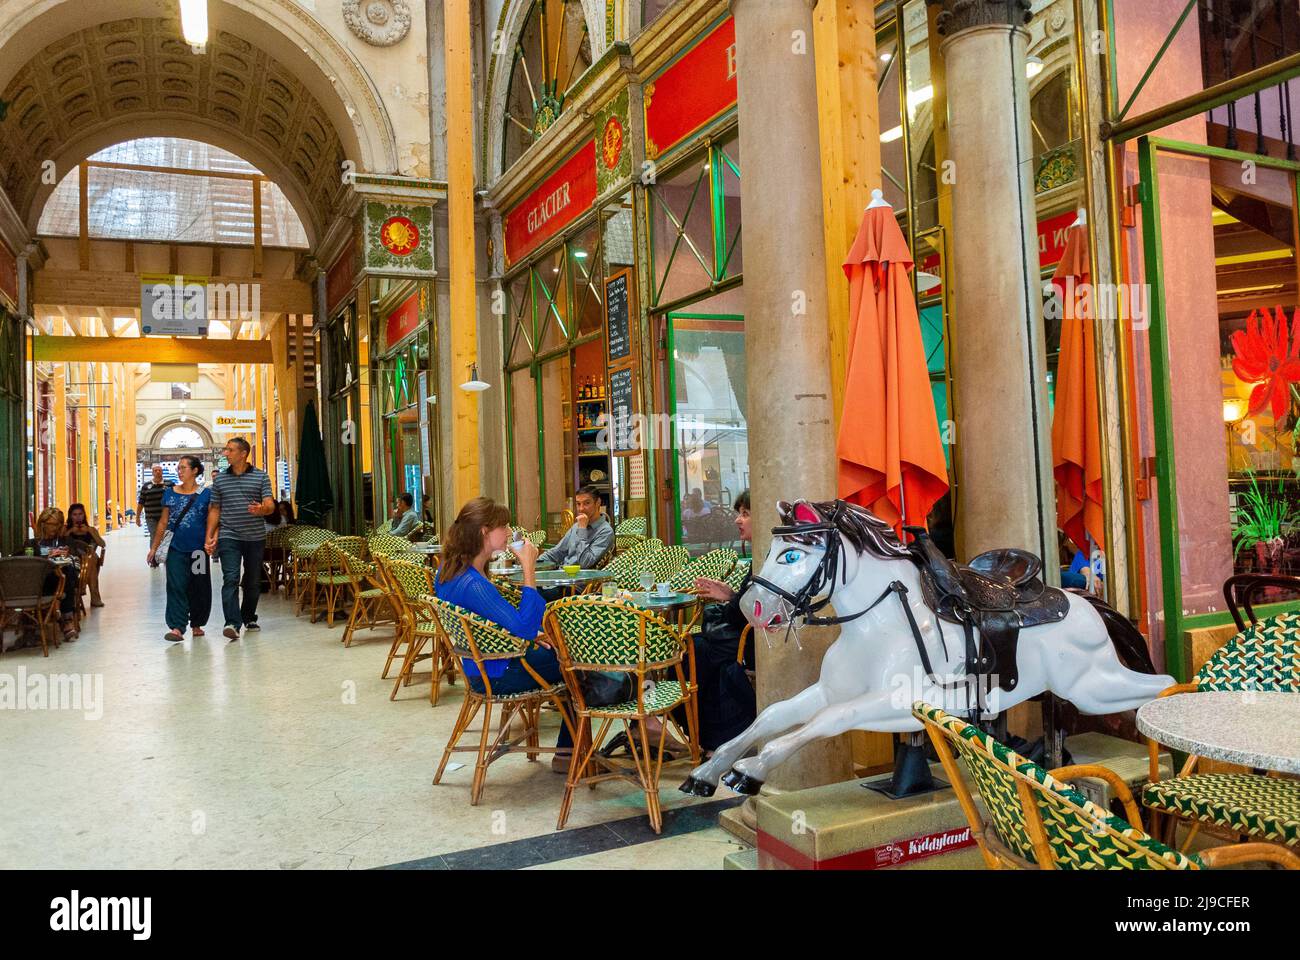 Bordeaux, France, Small Group People, Terrace, inside Old French Cafe, Old Shopping Center, Galerie Bordelaise, 'Rue Saint-Catherine' Stock Photo